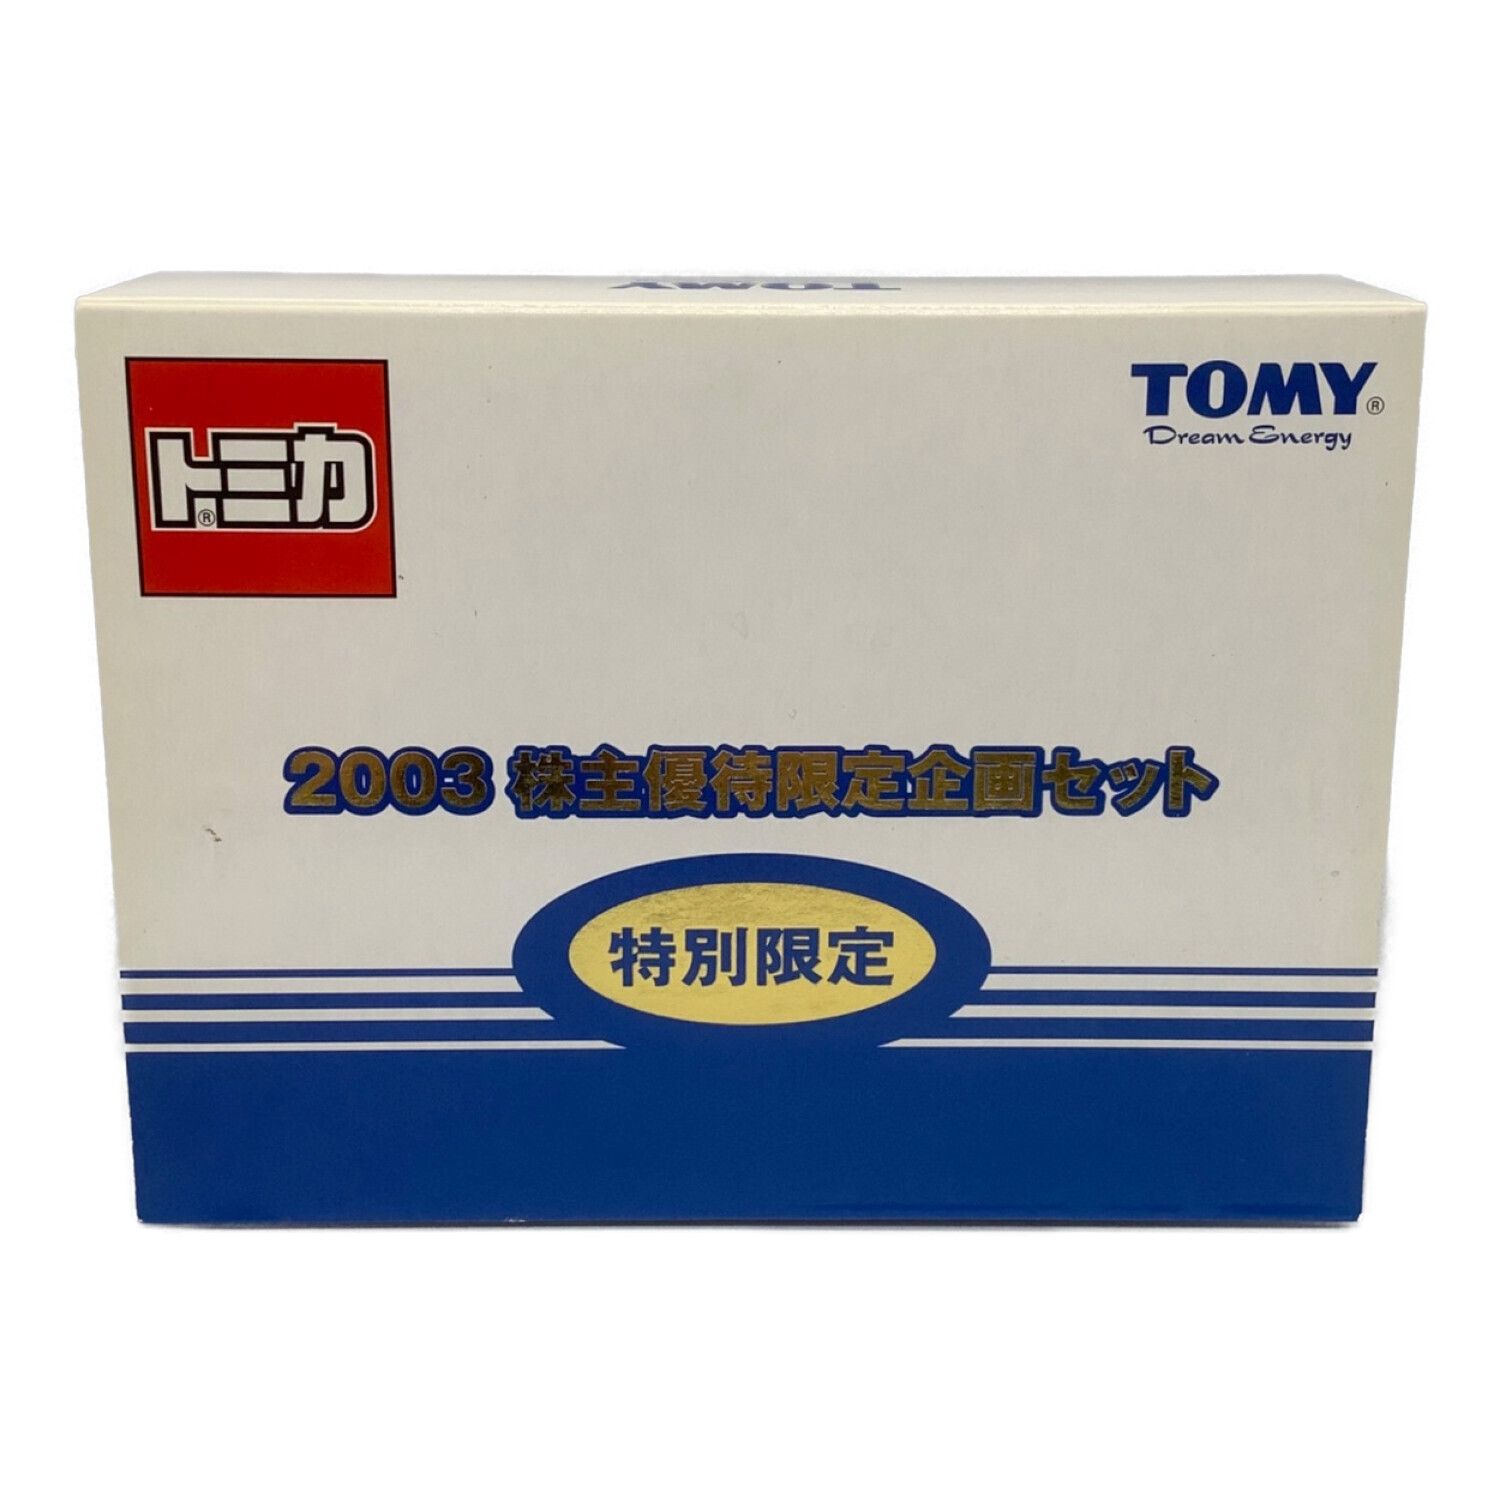 TOMY (トミー) トミカ 2003年株主優待限定企画セット｜トレファクONLINE